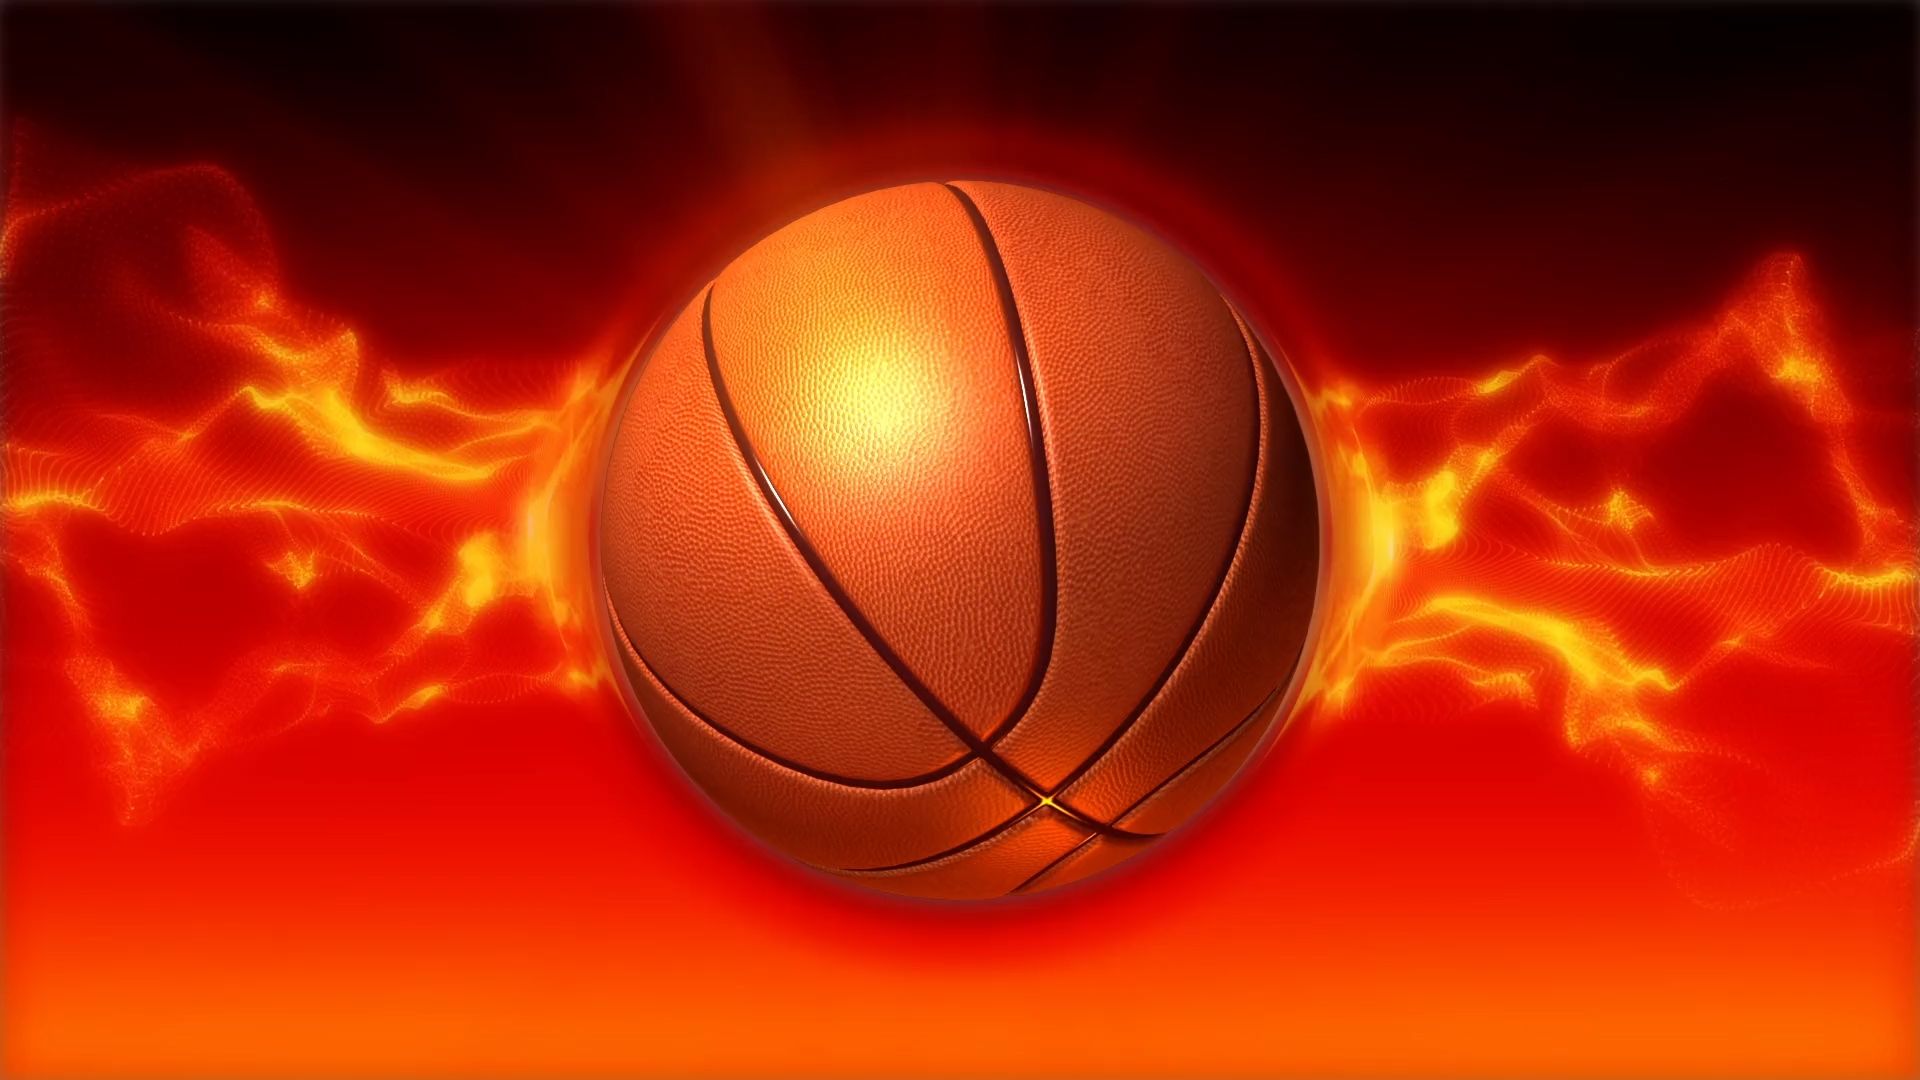 Basketball Ball Is In Fire On A Black Background Cool Basketball Pictures  Background Image And Wallpaper for Free Download